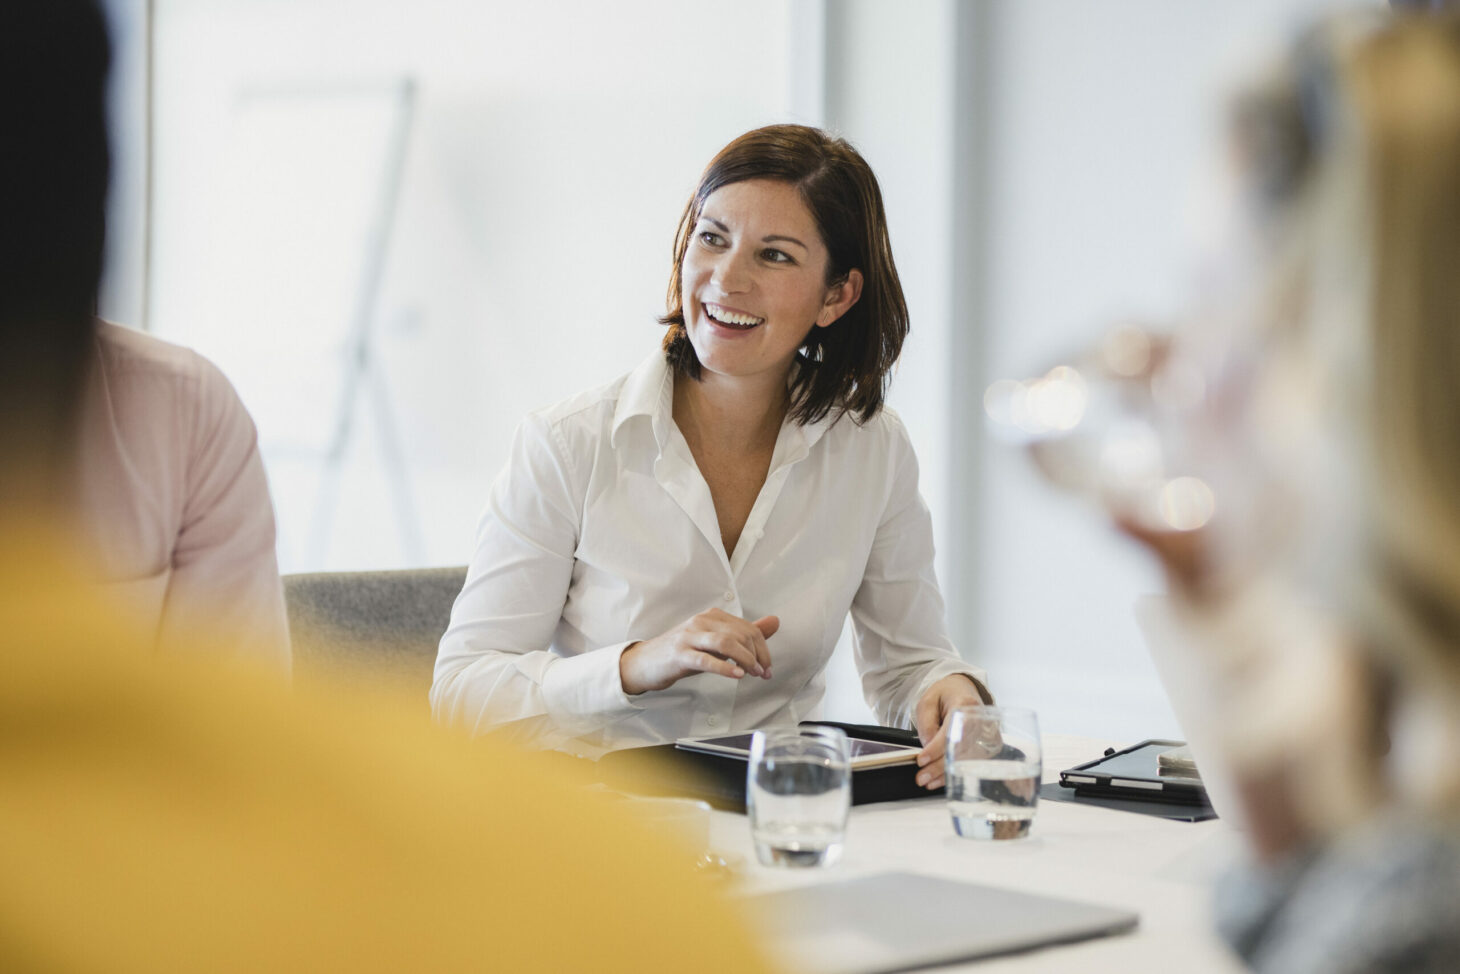 Cheerful mid adult woman smiling at business meeting